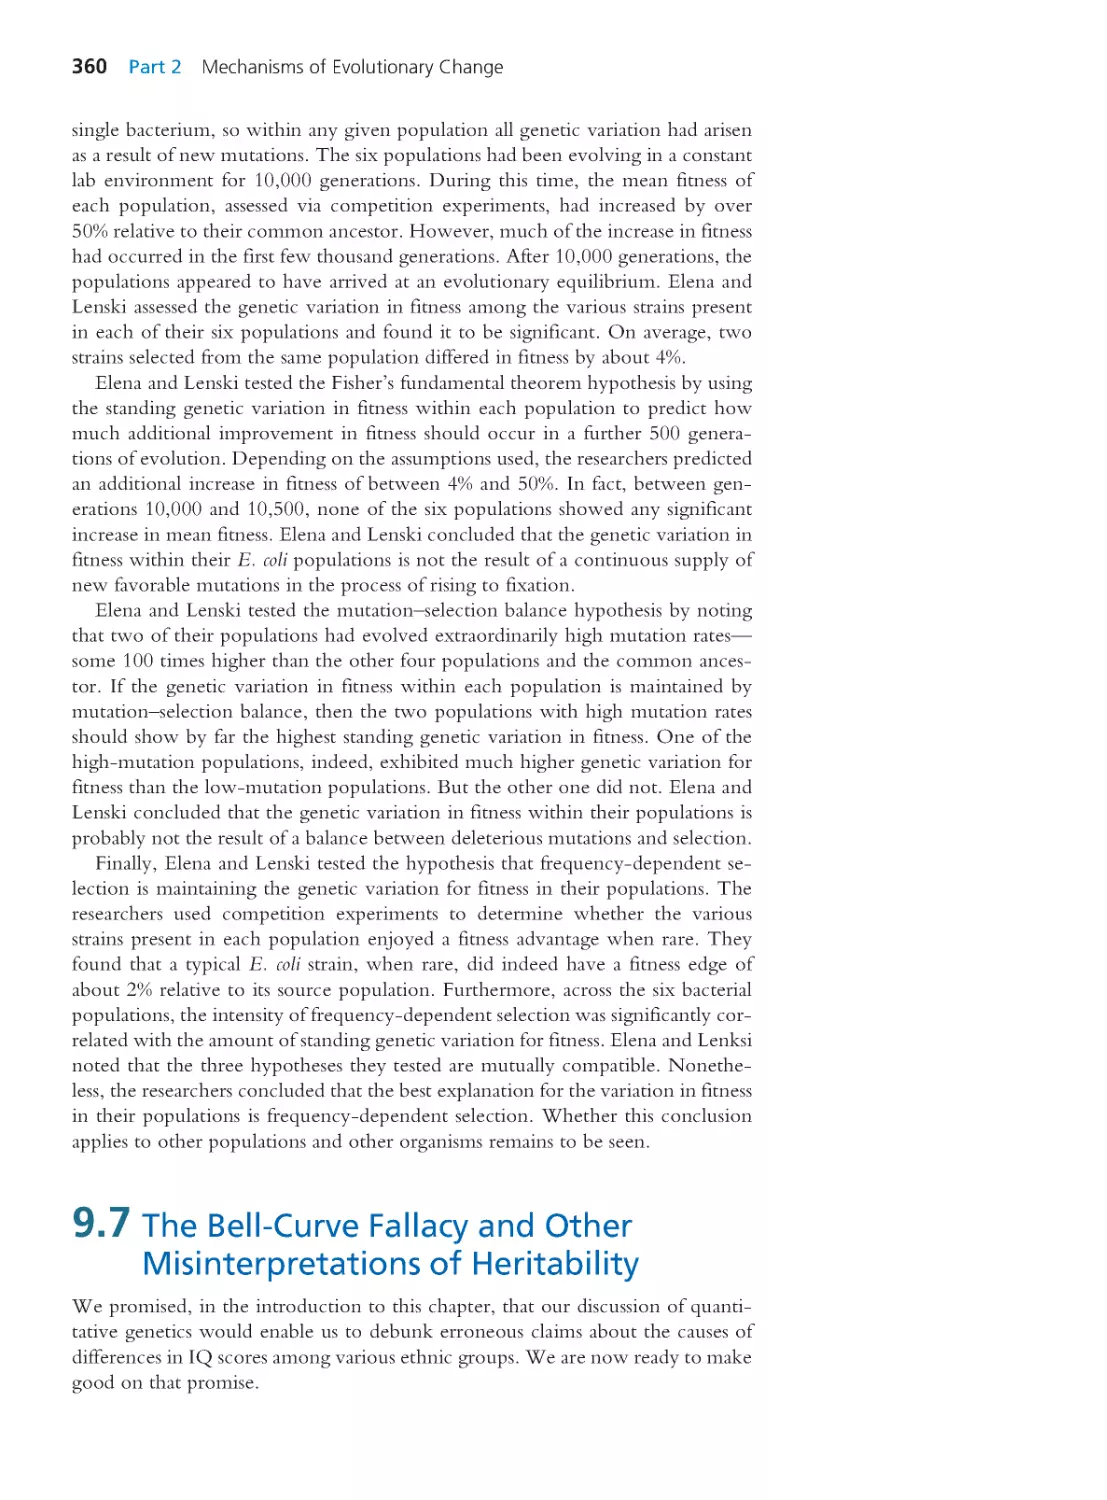 9.7 The Bell-Curve Fallacy and Other Misinterpretations of Heritability